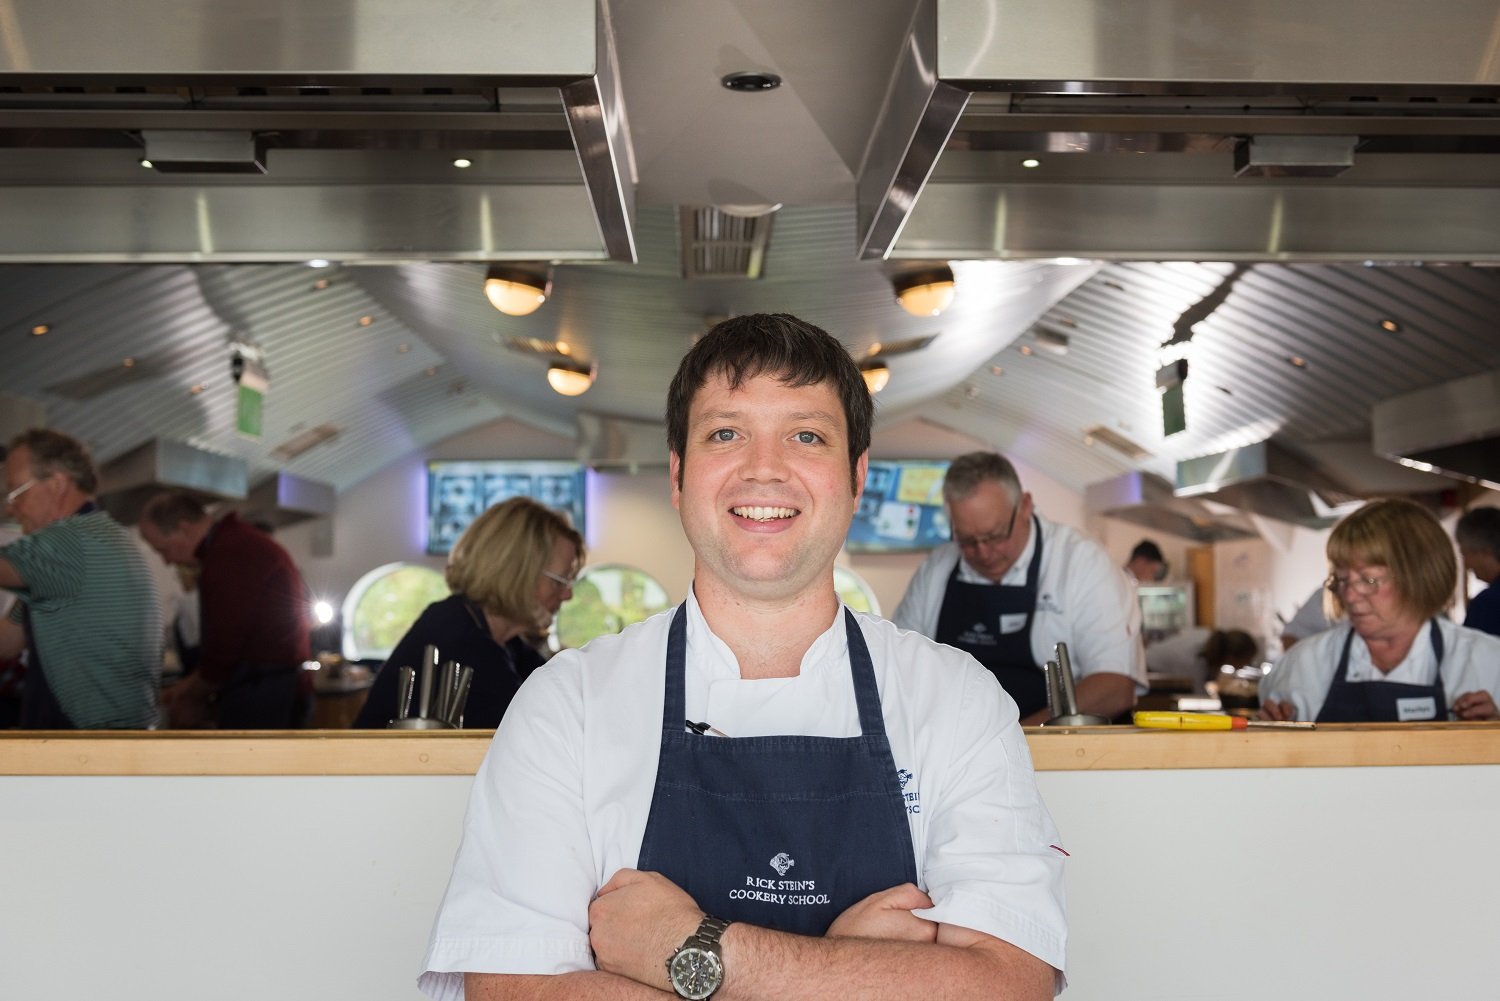 Nick Evans, head chef lecturer at Rick Stein's Cookery School